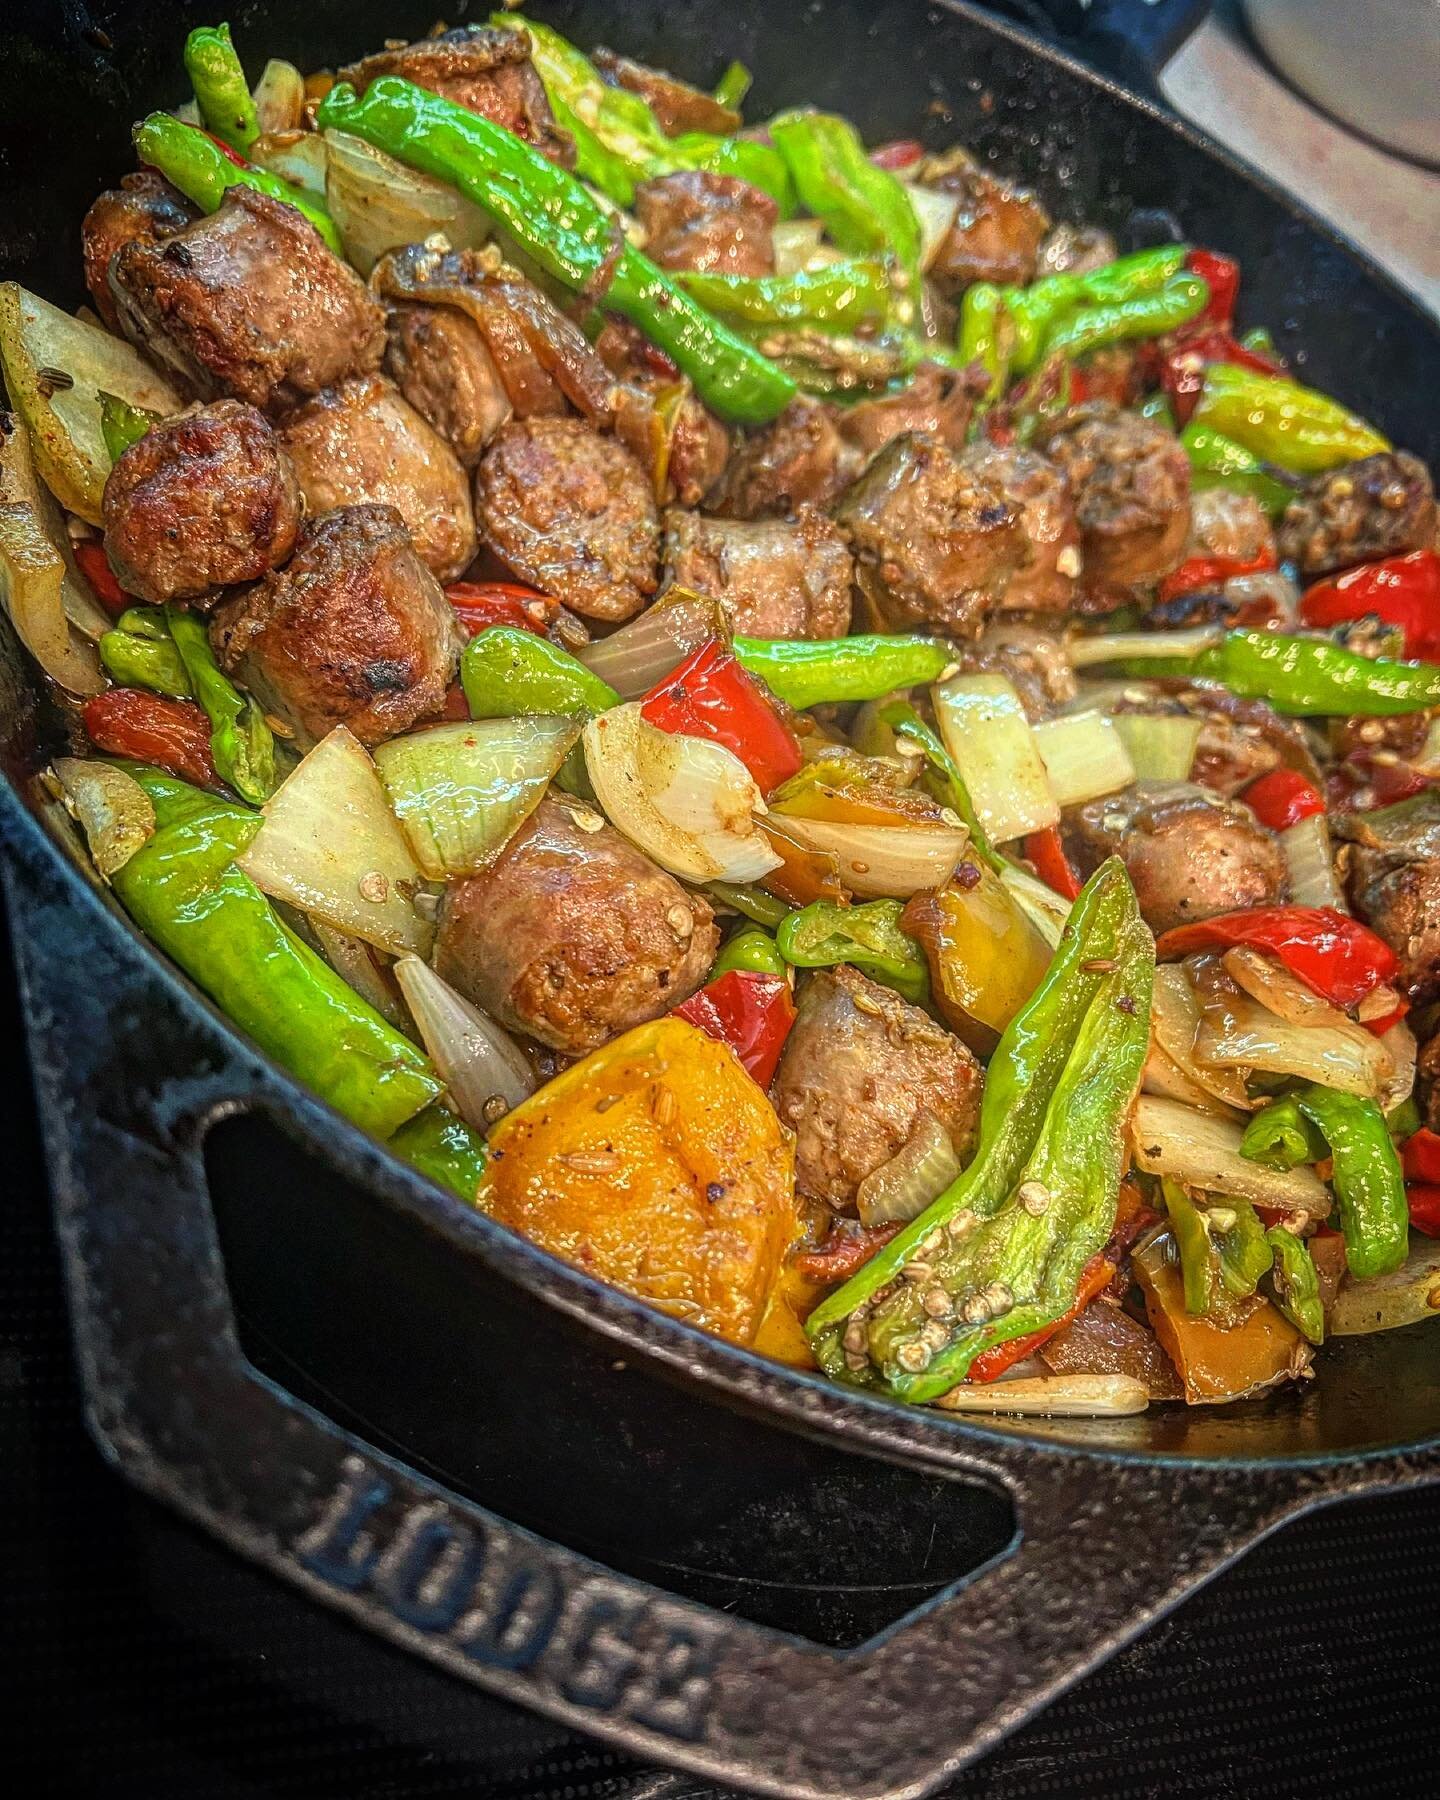 #caramelizing another batch of #sausage #peppers (+ #shishito peppers) and #onions in my @lodgecastiron #skillet for #dinner later